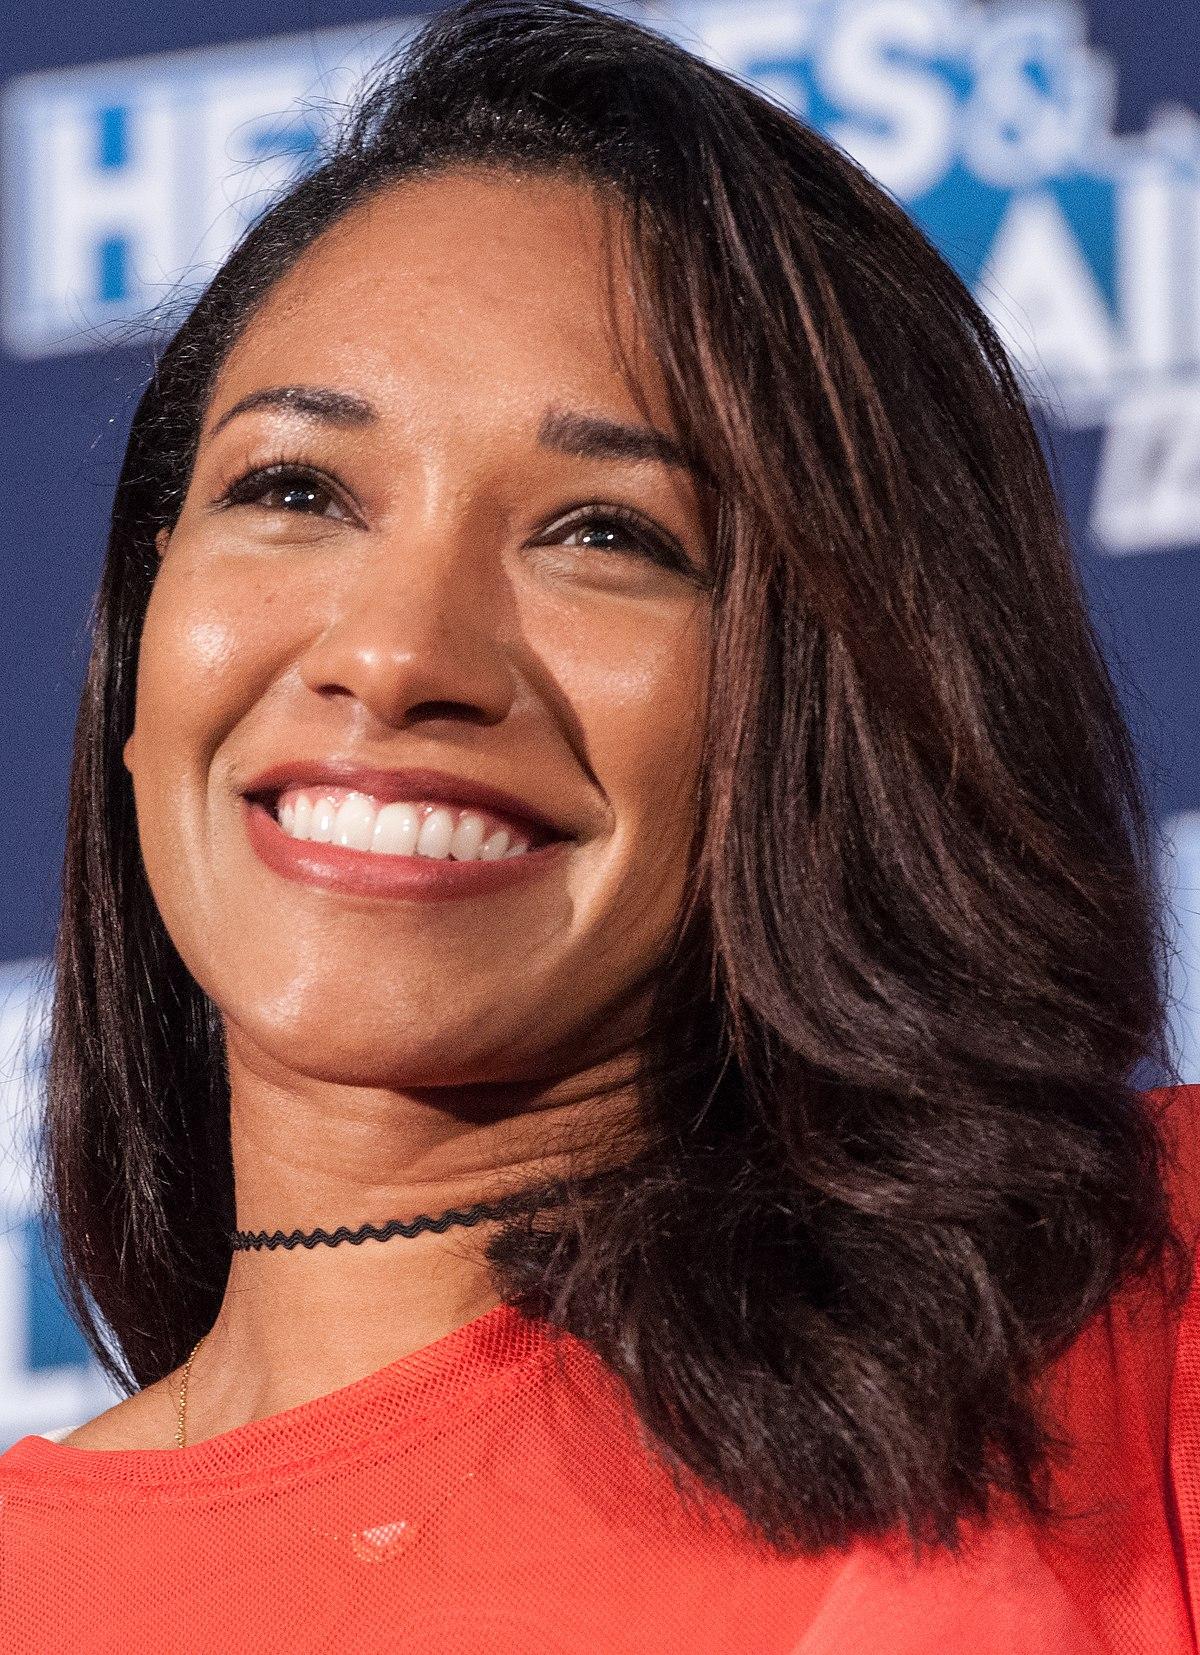 70+ Hot Pictures Of Candice Patton Who Plays Iris West In Flash TV Series 70